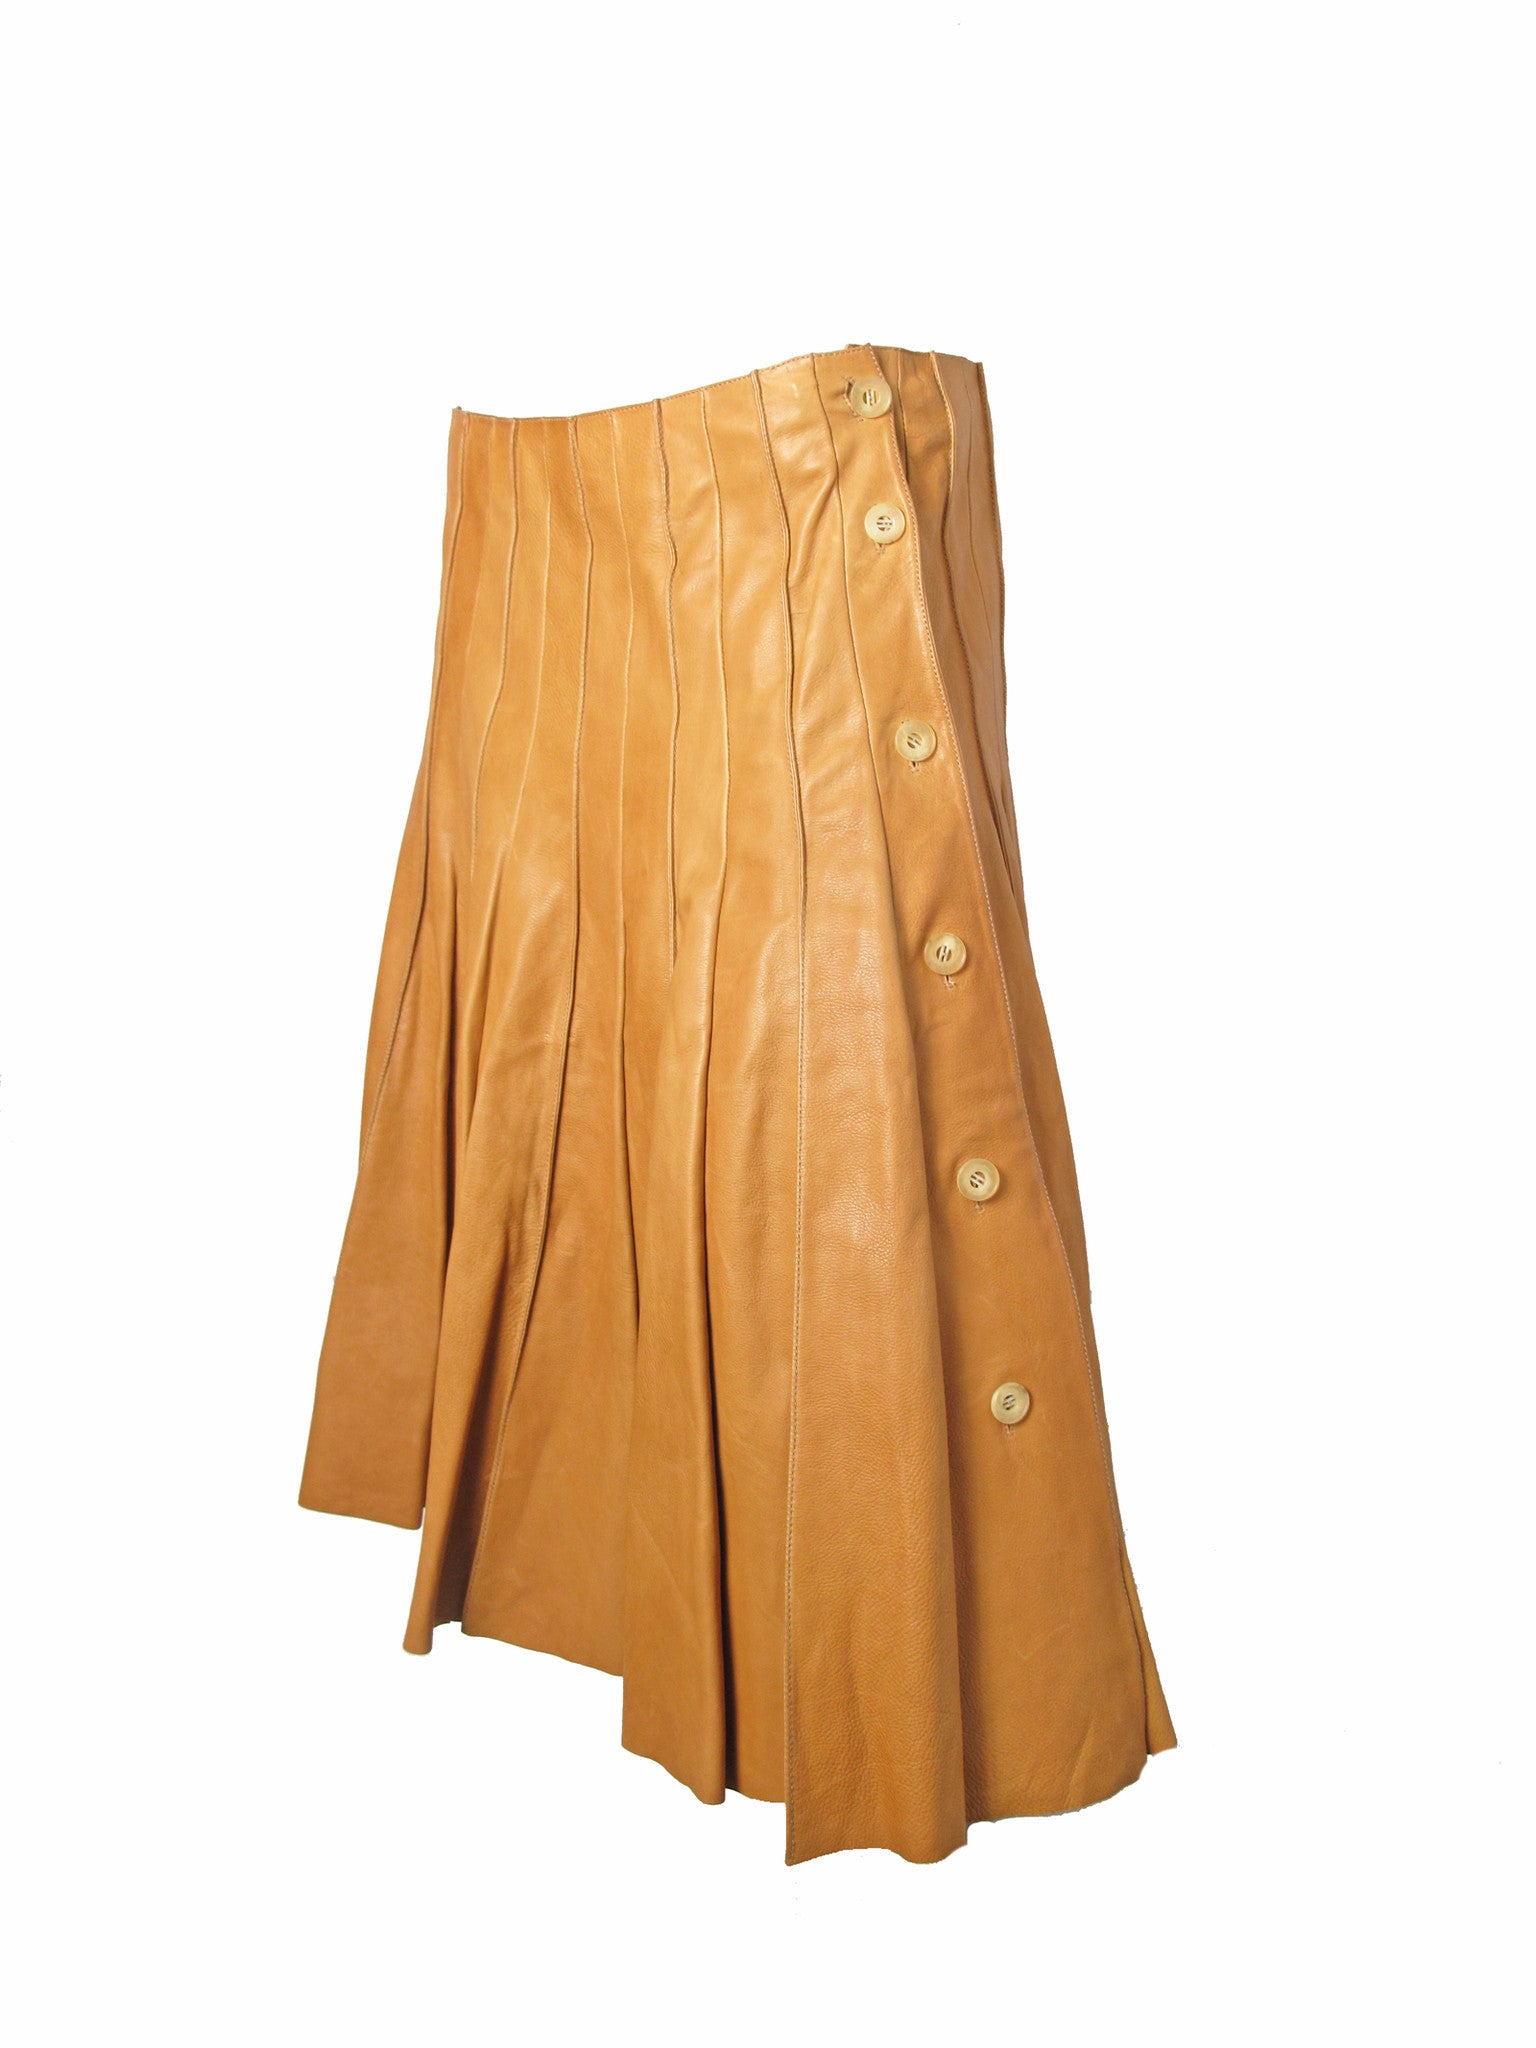 Rare HERMES Soft Leather Pleated Skirt Runway by JPG – ARCHIVE